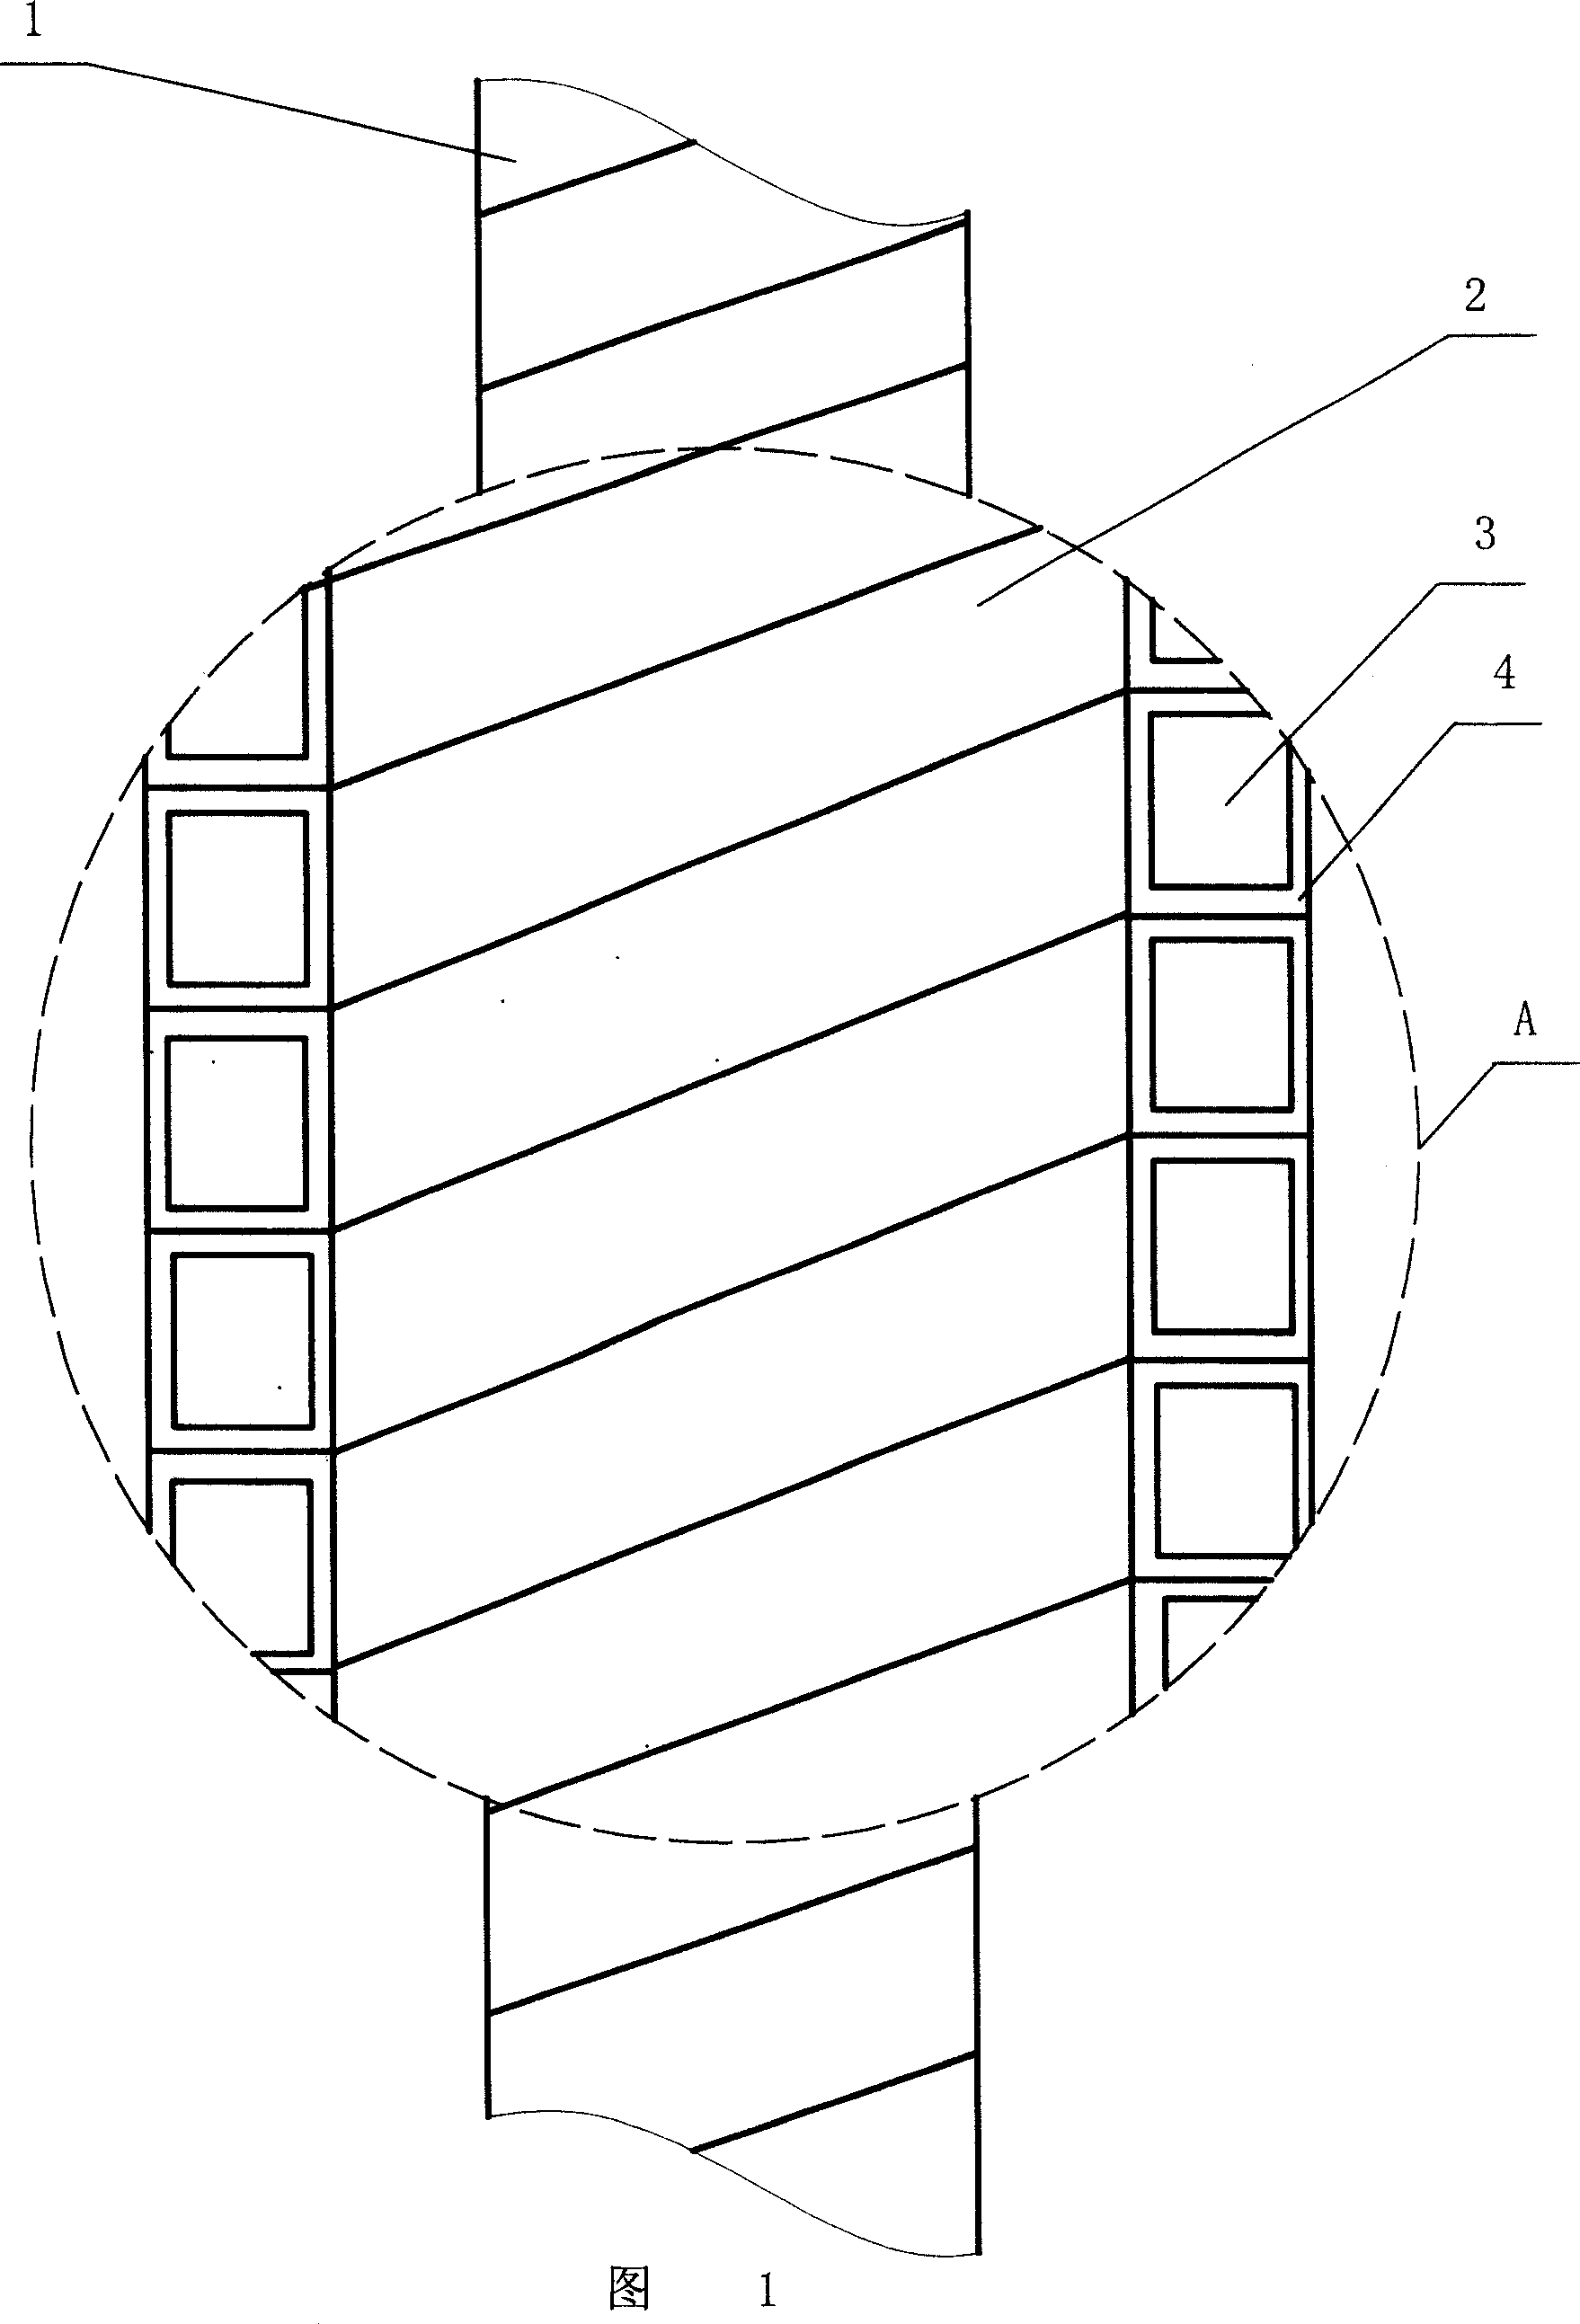 Heavy caliber high-strength plastic wound pipe having pipe wall made of wrapping material and manufacture method therefor